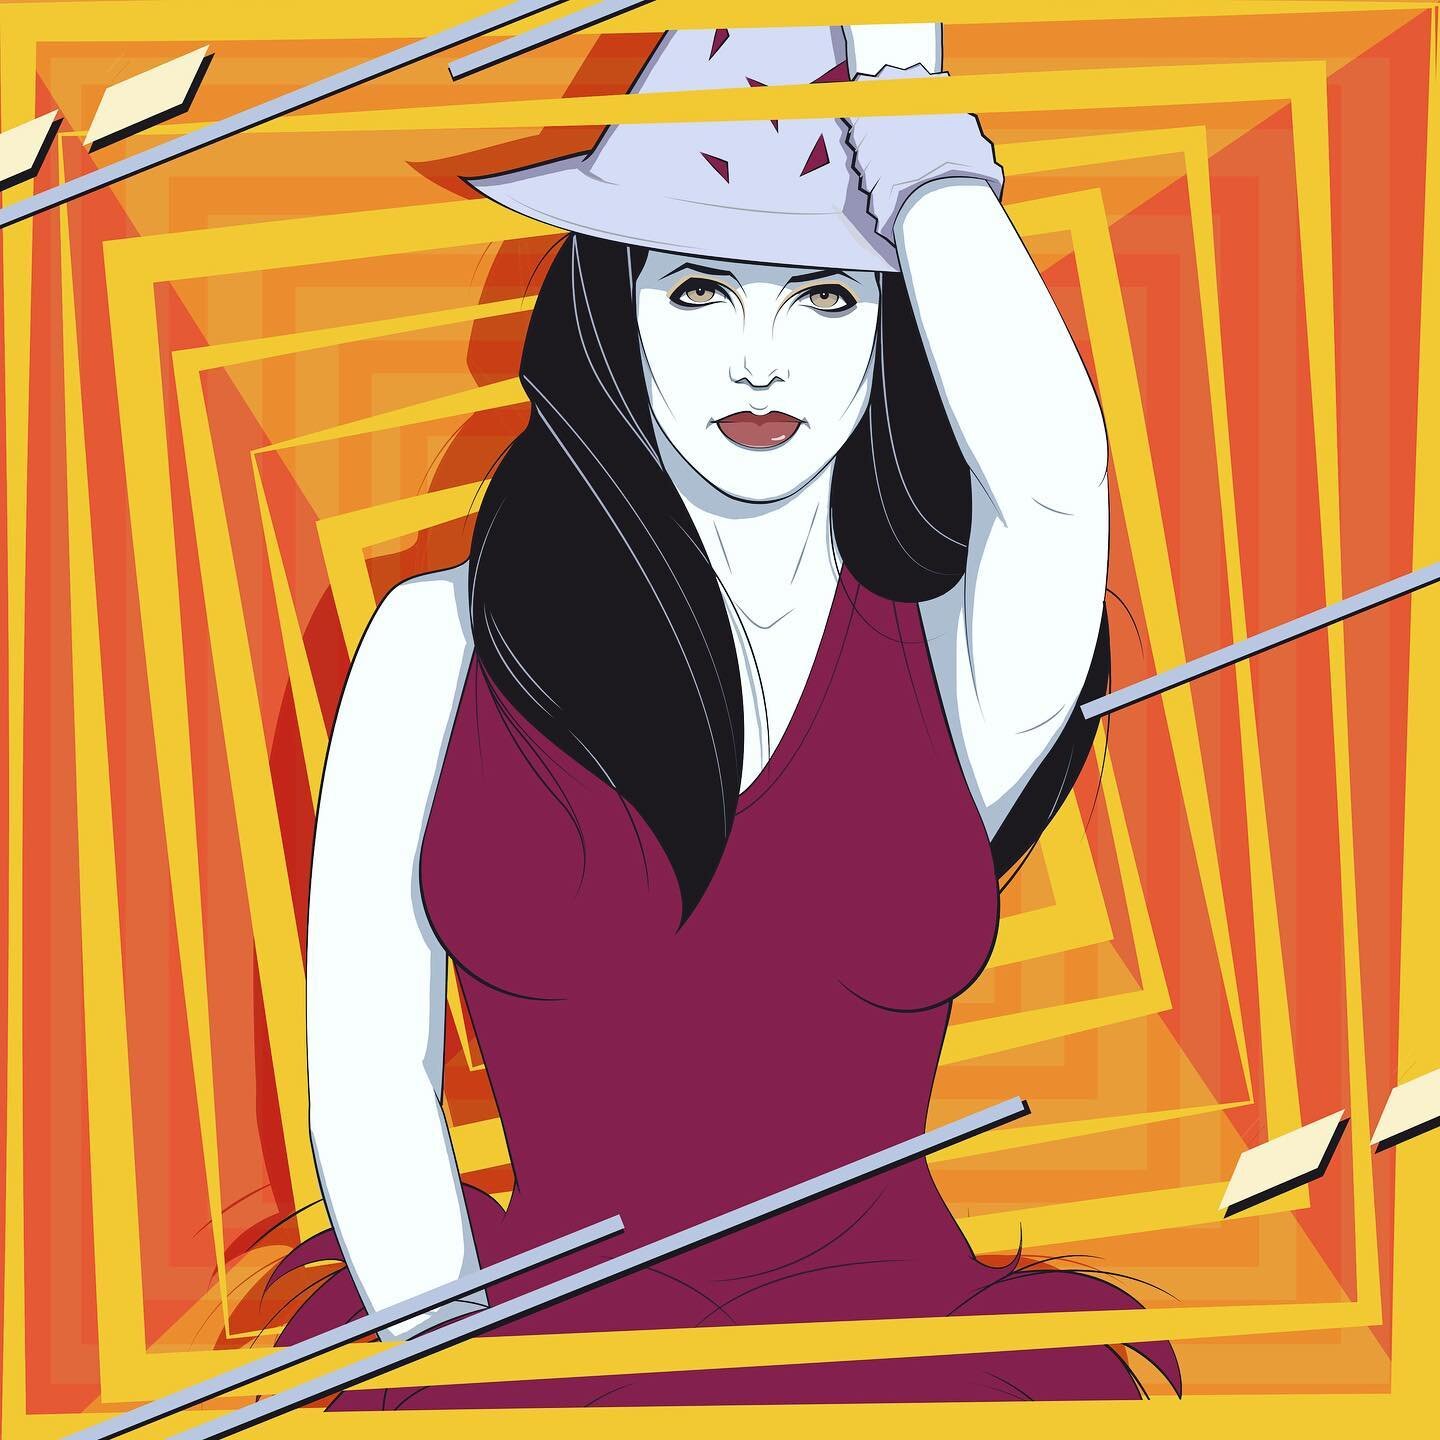 Her name is Britney and she dances on the Instagram. A little #patricknagel meets Britney #blackout art that no one asked for.
🥵🥶🥵🥶🥵🥶🥵🥶🥵🥶🥵🥶🥶🥵🥶🥵🥶🥵🥶🥵🥶🥵🥶🥵
#freebritney #britneyspears #80s #80sart #britneyarmy #illustration #illus